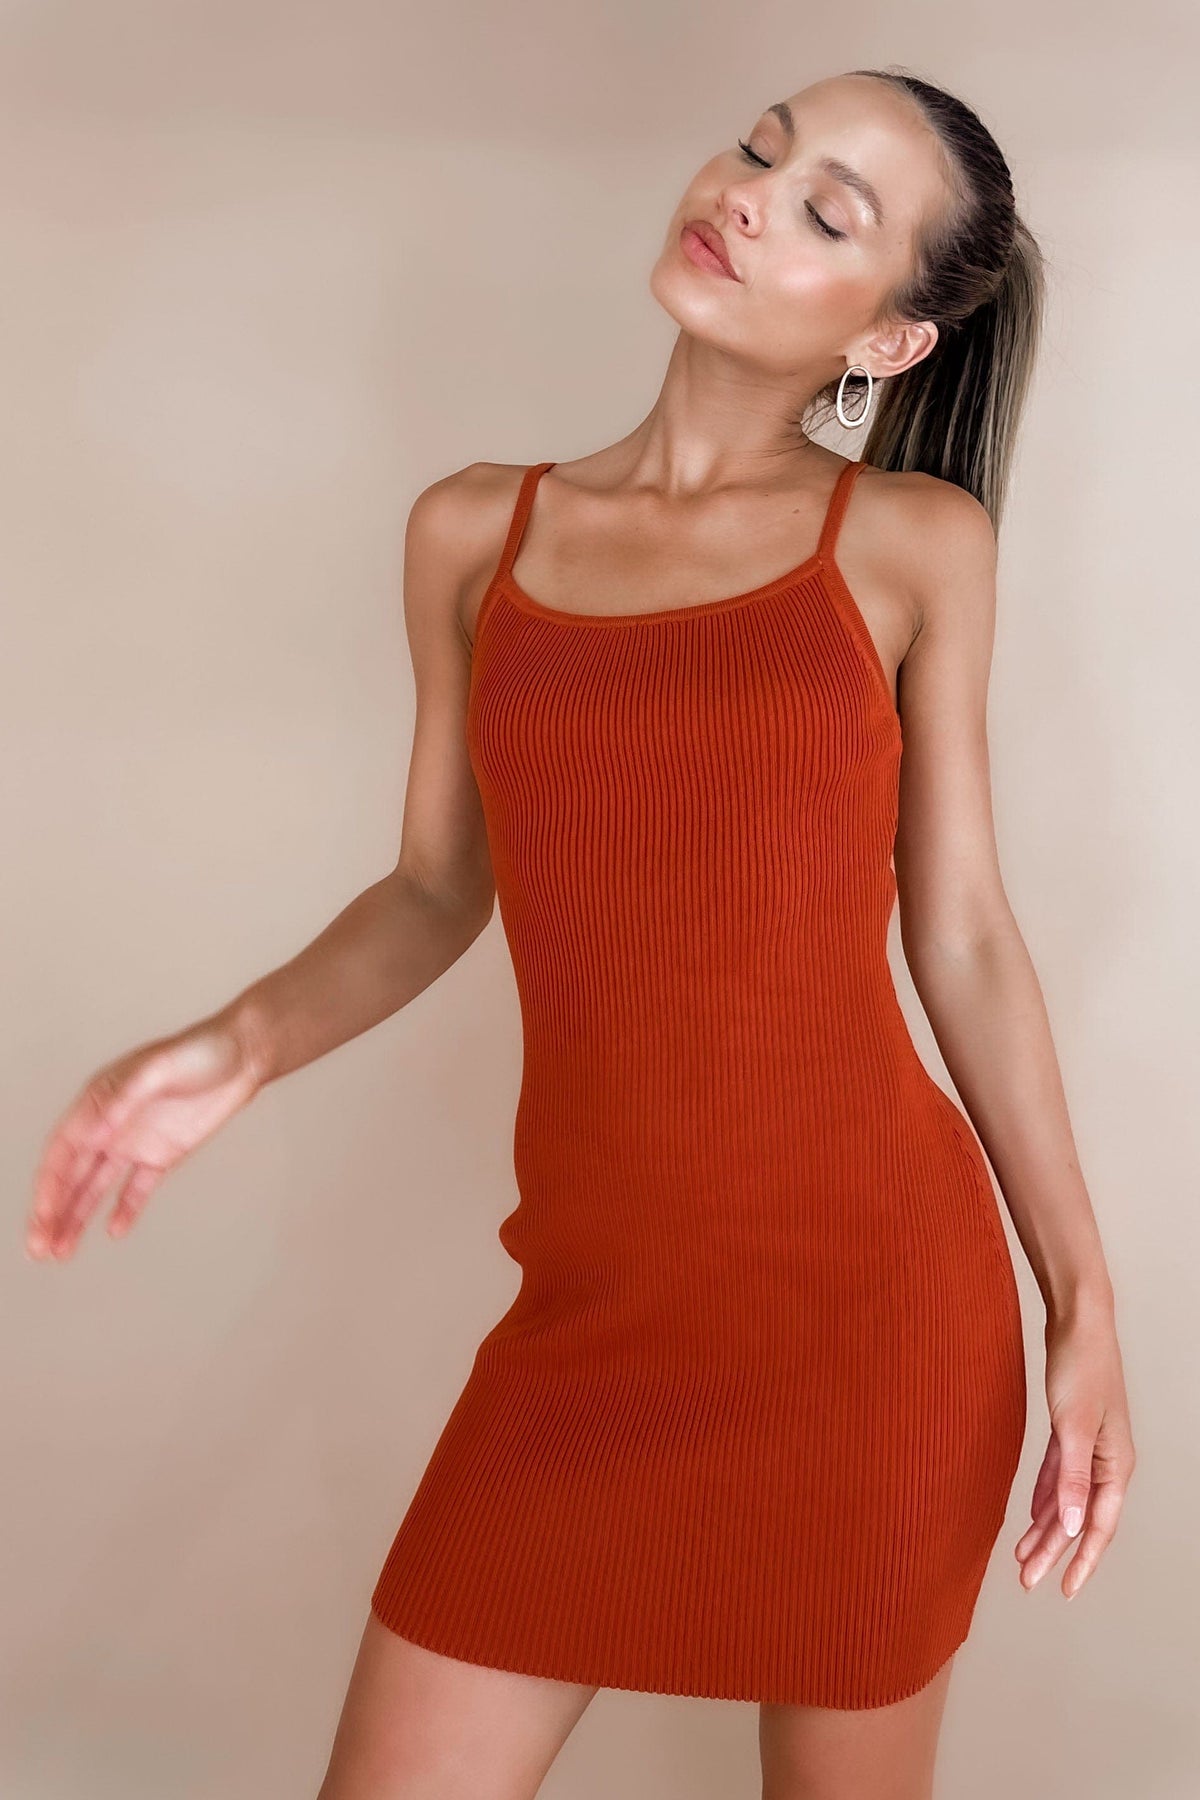 Talitha Dress, BASICS, DRESS, DRESSES, MINI DRESS, new arrivals, POLYESTER, RED, RIBBED, Talitha Dress only $61.00 @ MISHKAH ONLINE FASHION BOUTIQUE, Shop The Latest Women&#39;s Dresses - Our New Talitha Dress is only $61.00, @ MISHKAH ONLINE FASHION BOUTIQUE-MISHKAH